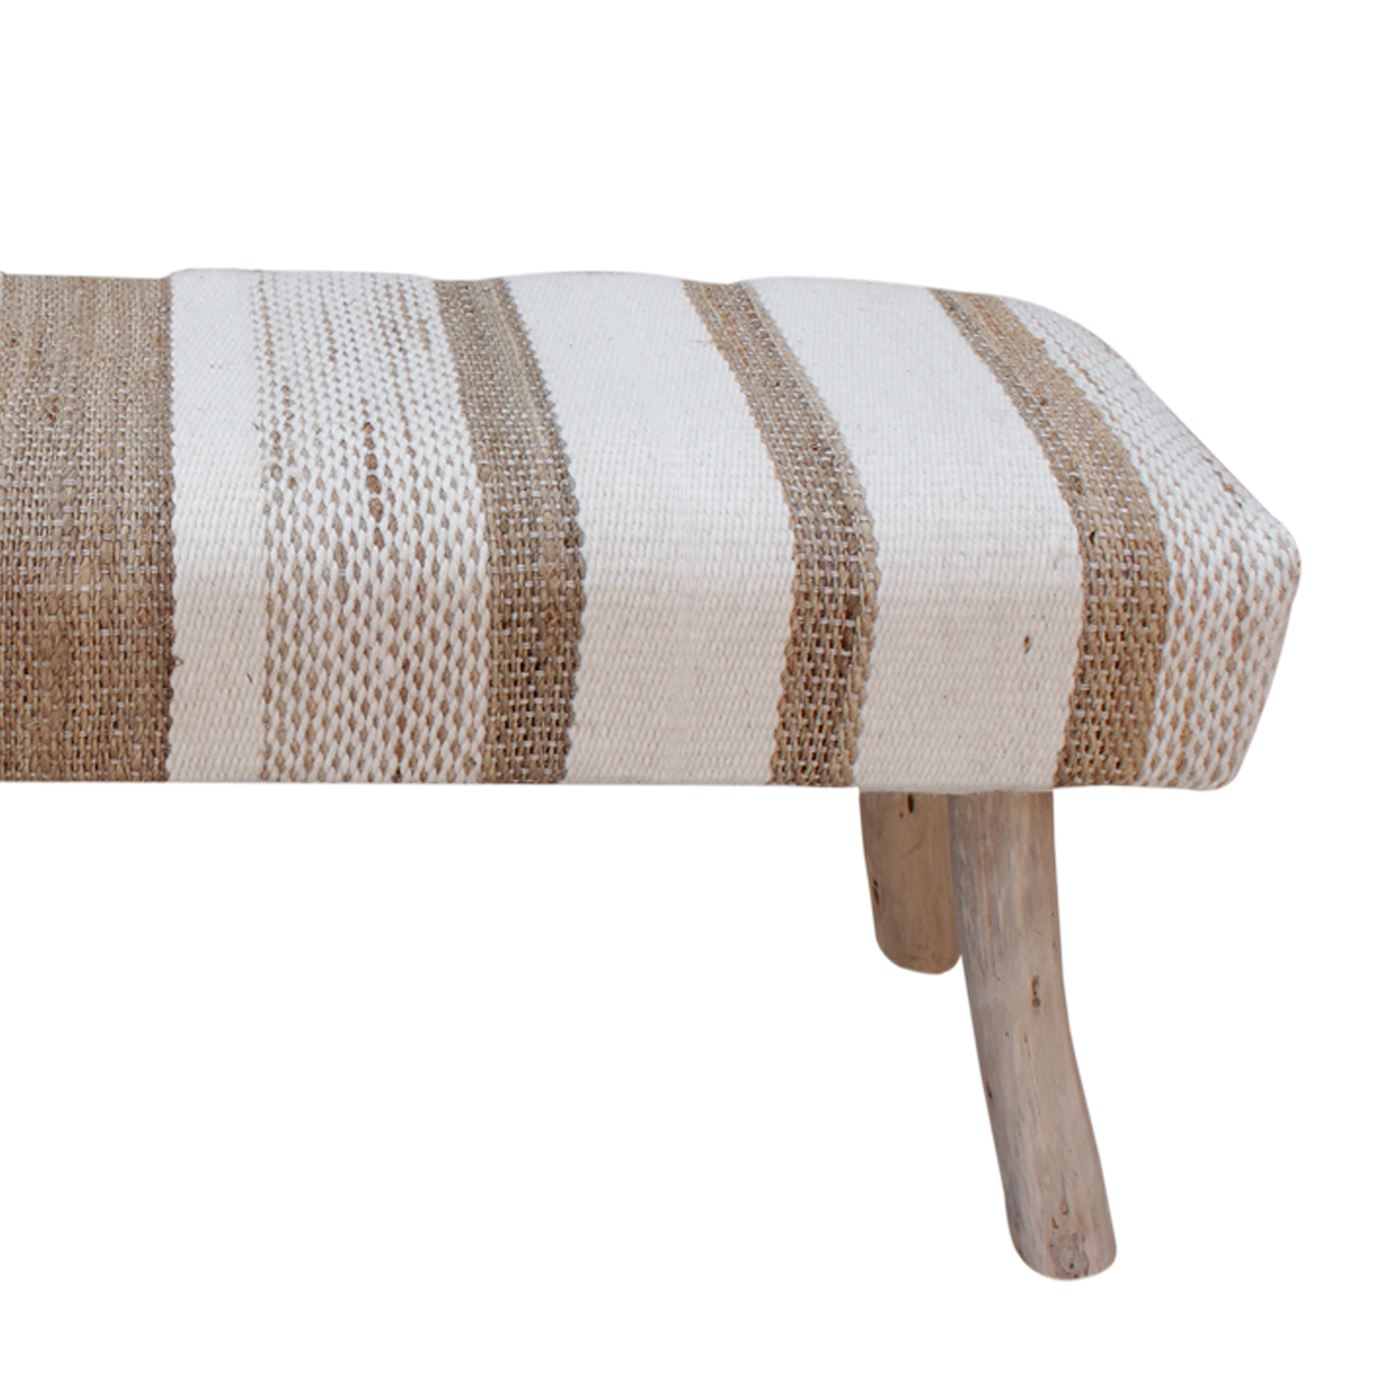 Gstrow-Ii Bench, Jute, Wool, Polyester, Natural, Natural White, Pitloom, Flat Weave